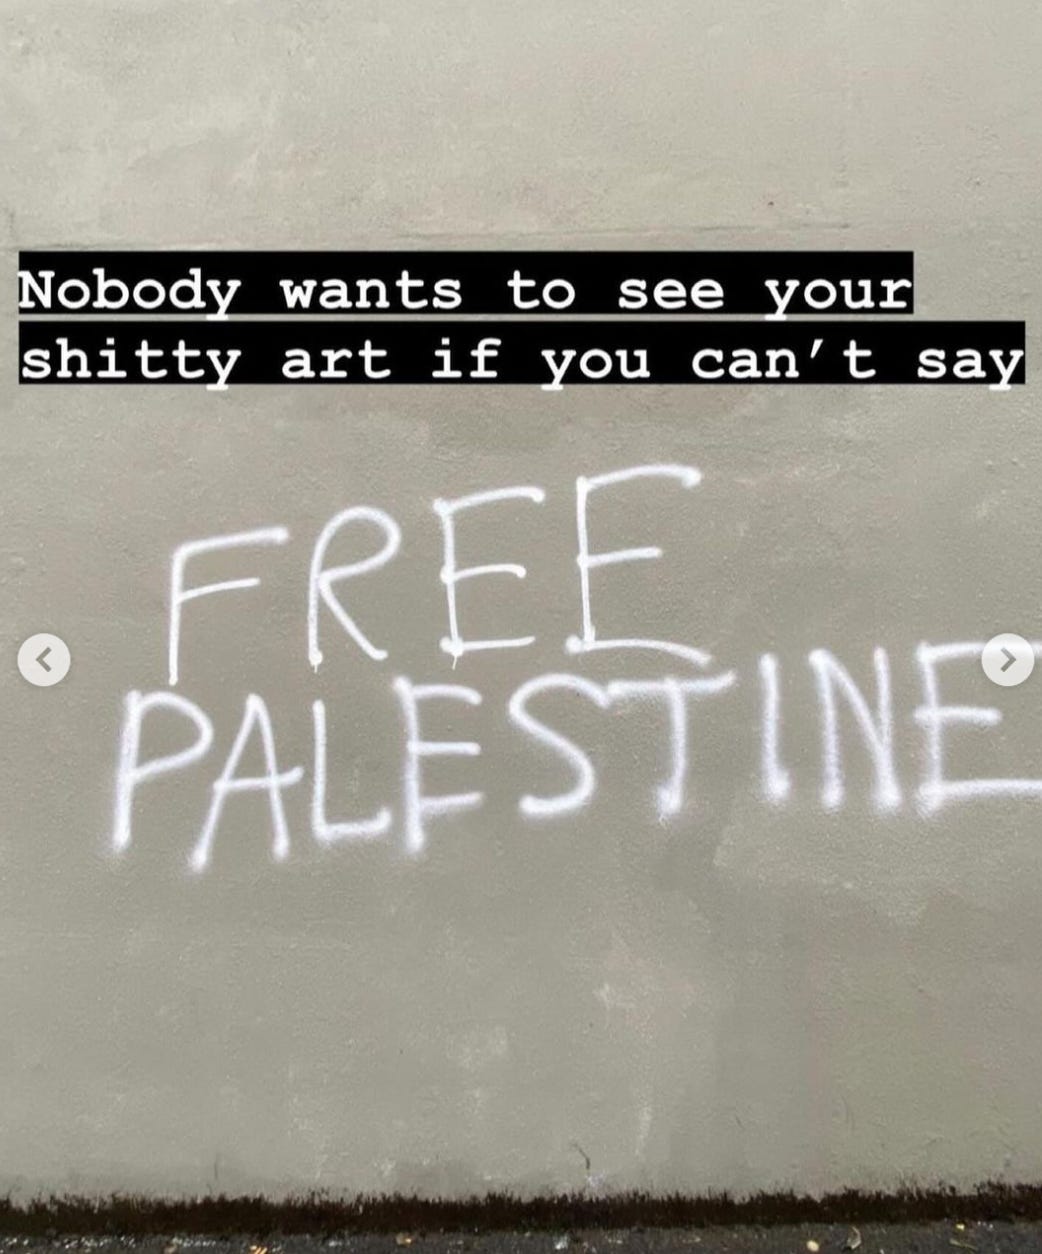 Instagram text reads, "Nobody wants to see your shitty art if you can't say" followed by graffiti of the words "FREE PALESTINE" on a wall